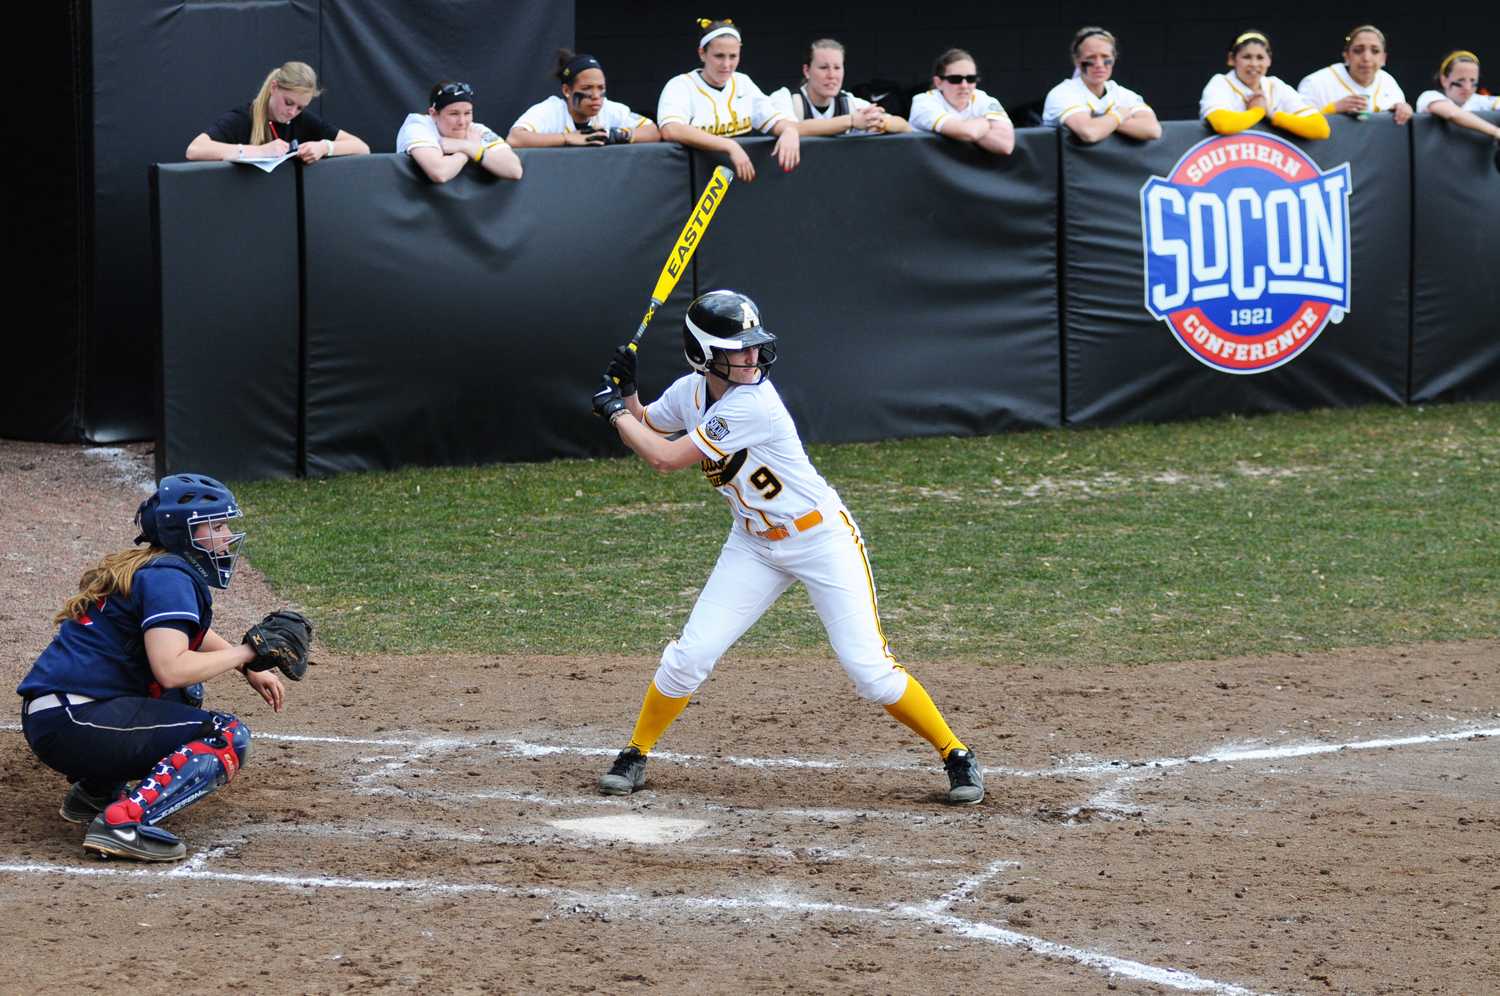 Senior outfielder Allie Cashion stands ready to bat in a game against Samford earlier this season. The team’s next home game is Friday at 4 p.m. against College of Charleston.  App State Athletics  |  Courtesy Photo